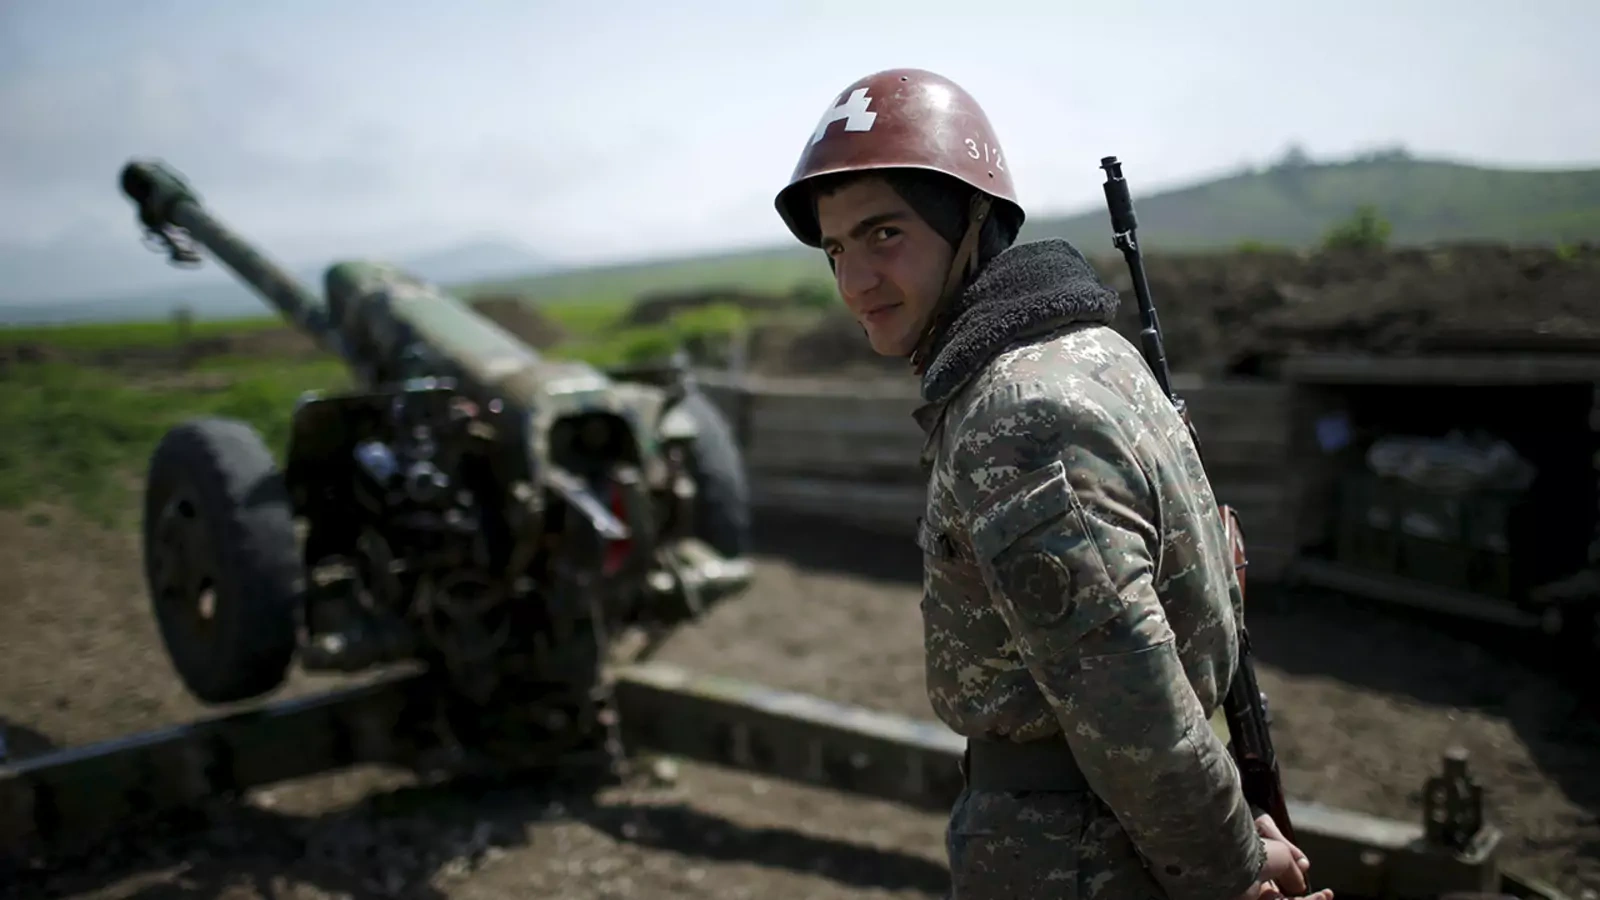 An ethnic Armenian soldier in the disputed Nagorno-Karabakh region.